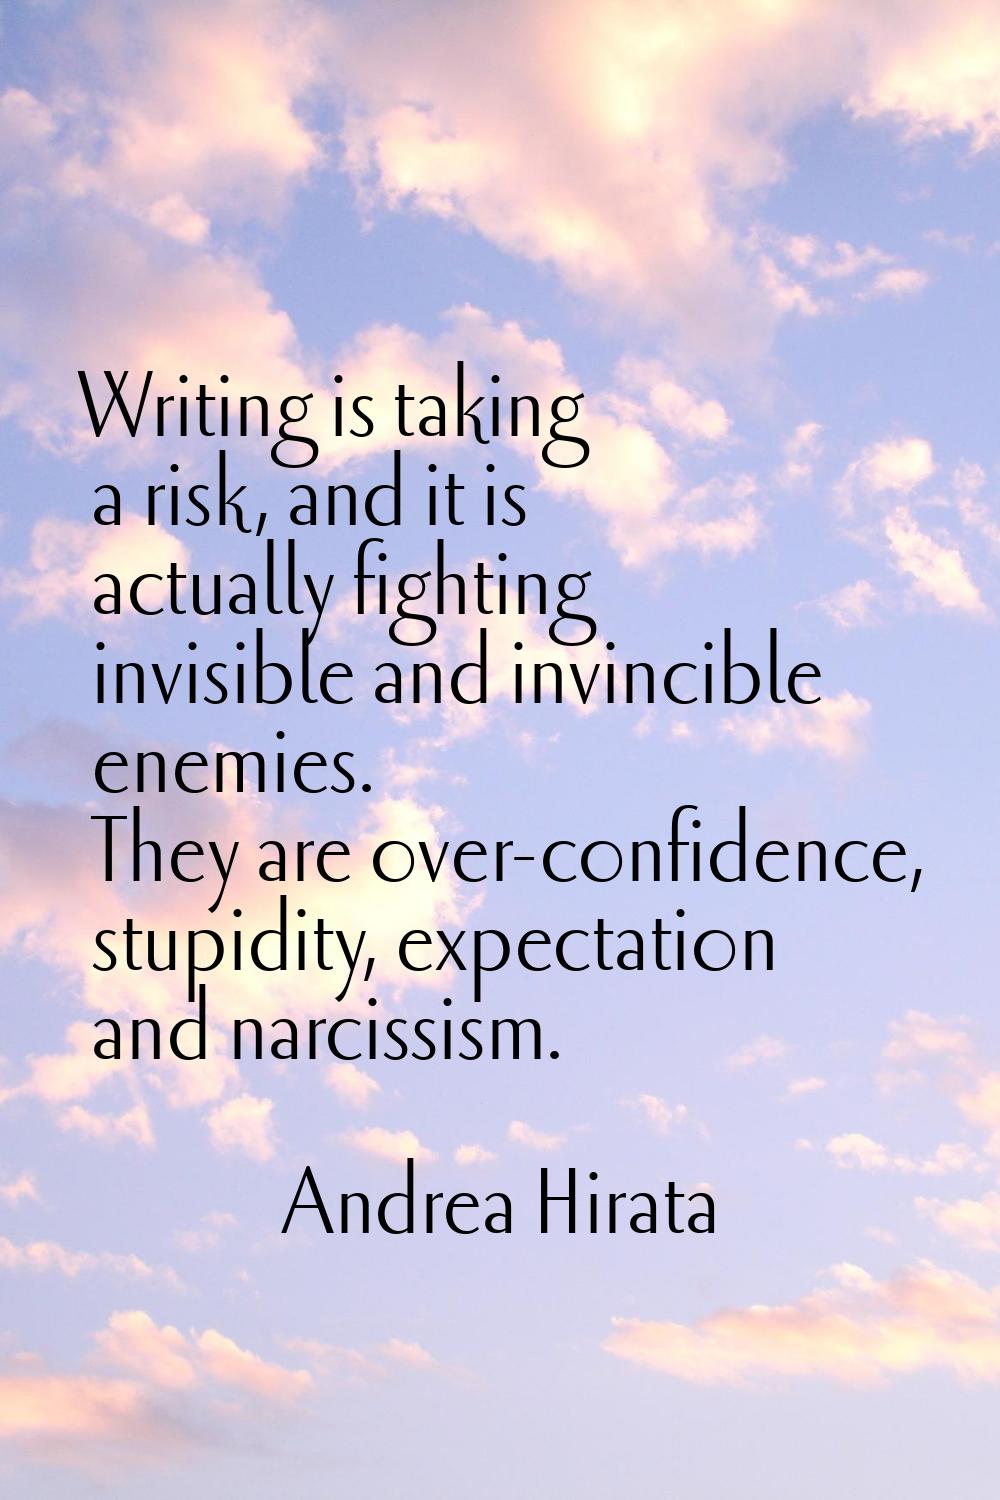 Writing is taking a risk, and it is actually fighting invisible and invincible enemies. They are ov